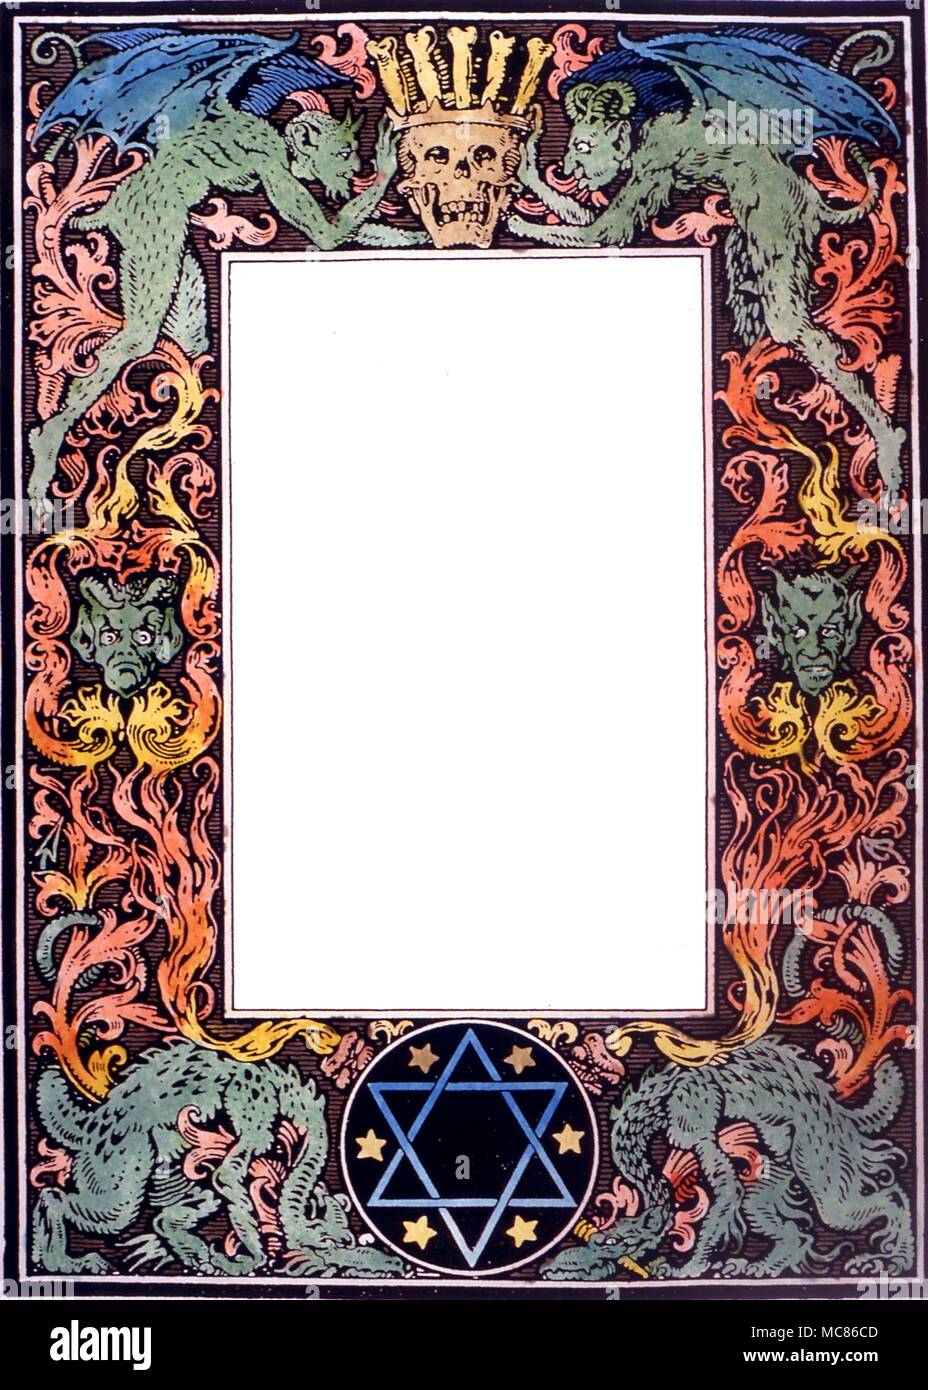 WITCHCRAFT Decorative border with witchcraft images and magical symbols. from 'La Vie Execrable de Guillemete Babin, Sorciere' by Carron. design by bernard Zuber, 1926, based on Bodin's 'Demonomanie' Stock Photo